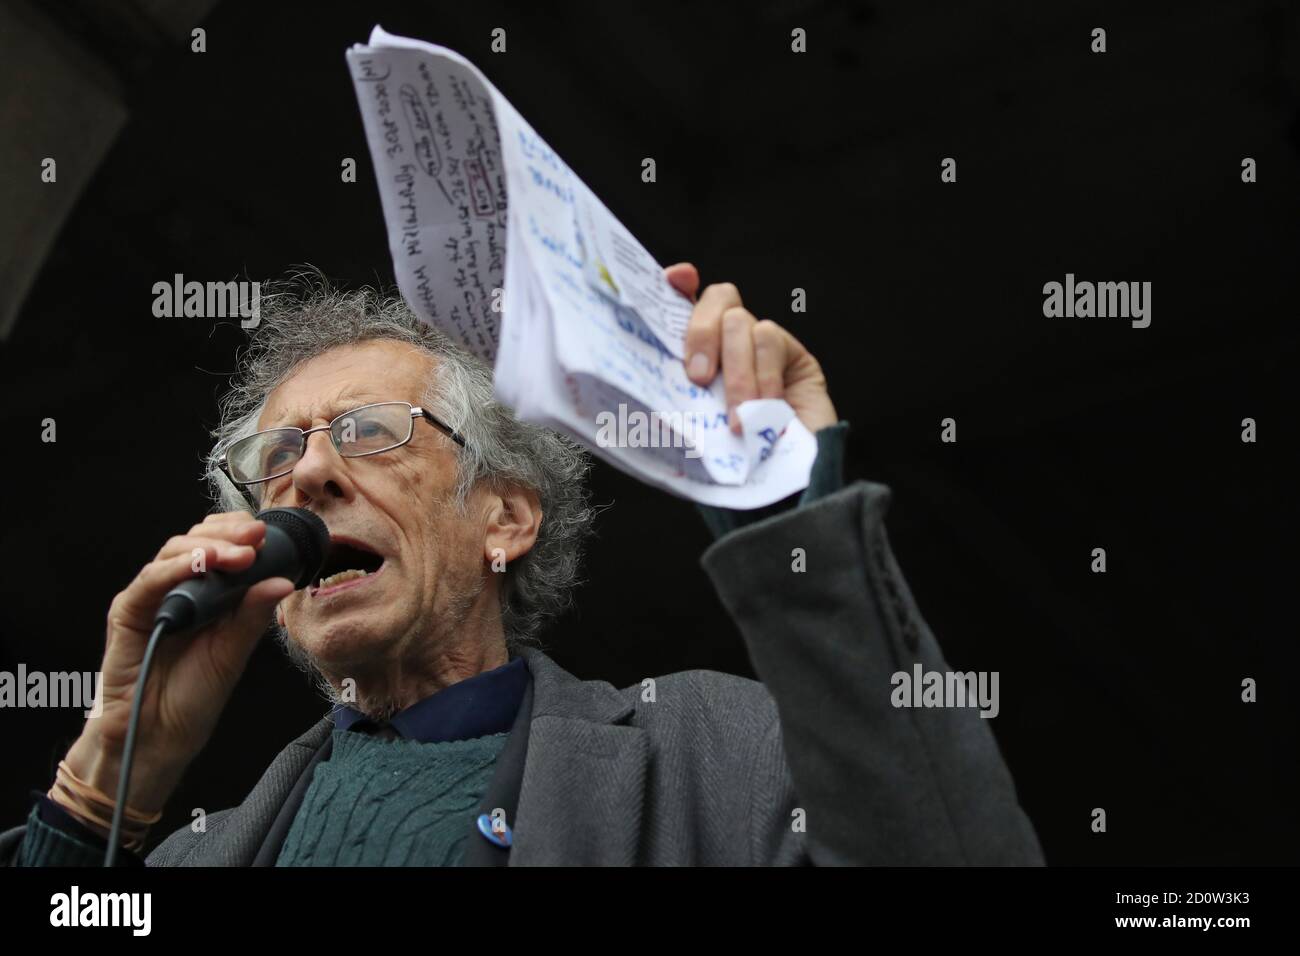 Piers Corbyn speaks at an anti-lockdown protest in Old Market Square, Nottingham, after a range of new restrictions to combat the rise in coronavirus cases came into place in England. Stock Photo